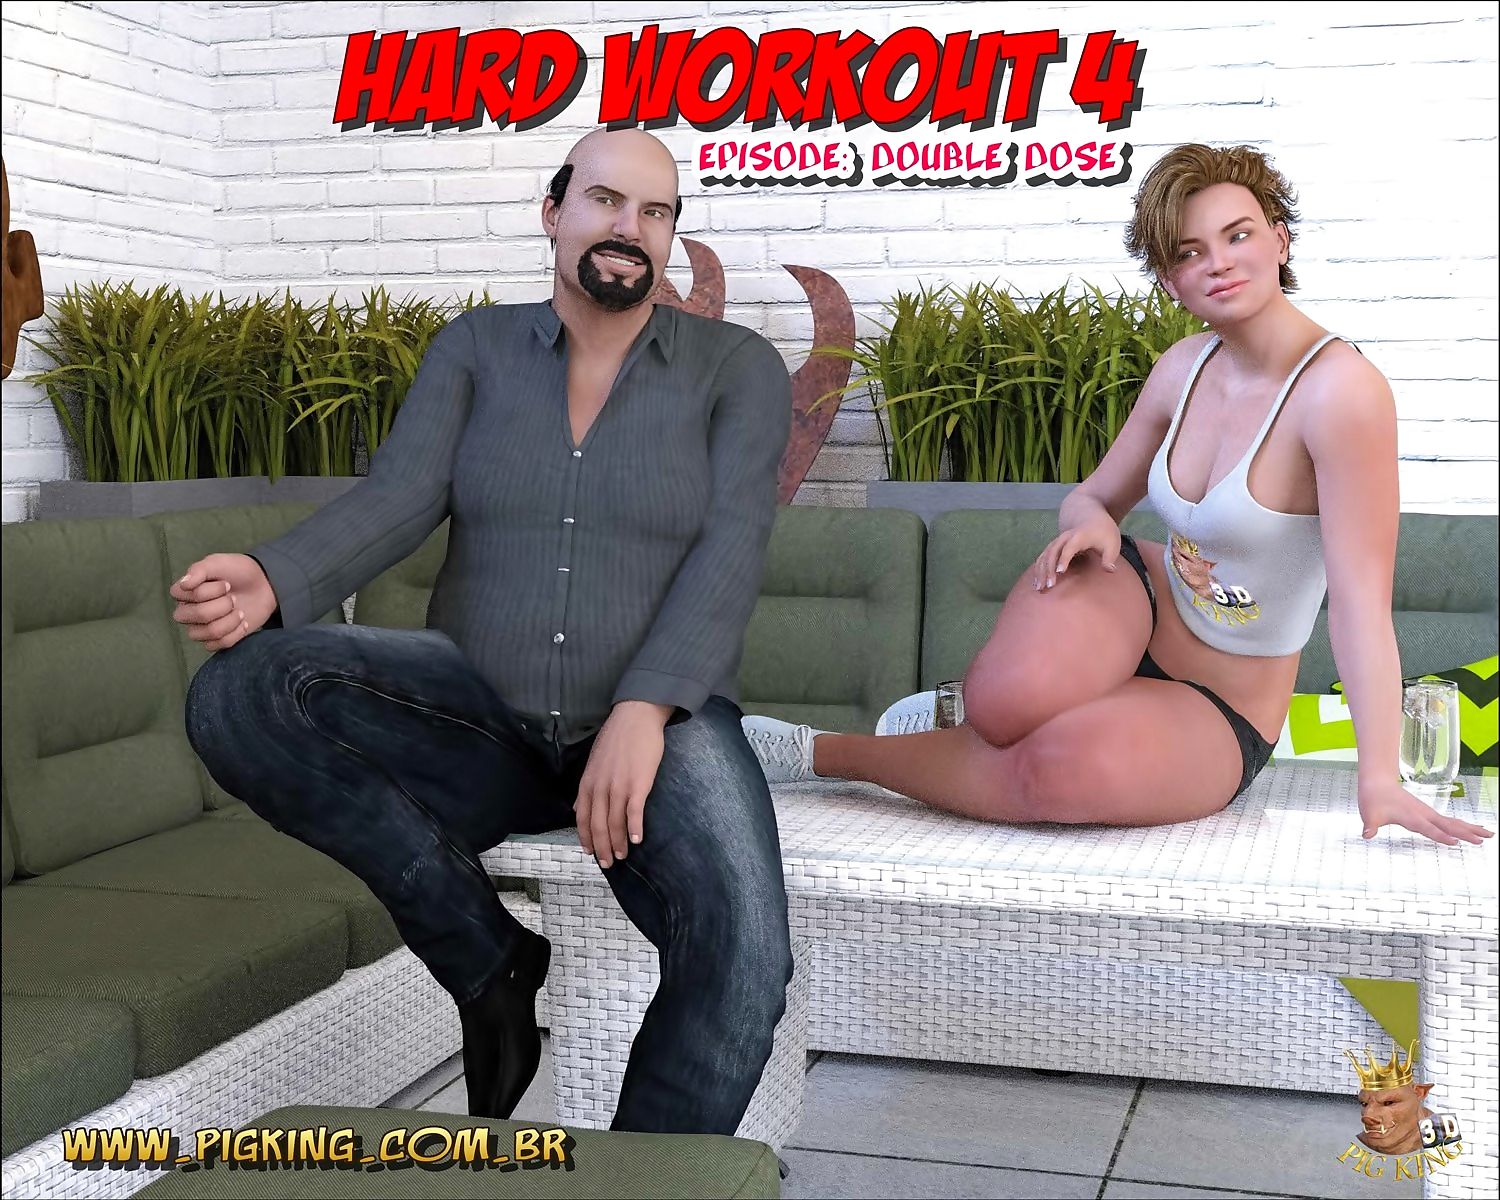 Pig King- Hard Workout 4 Double Dose